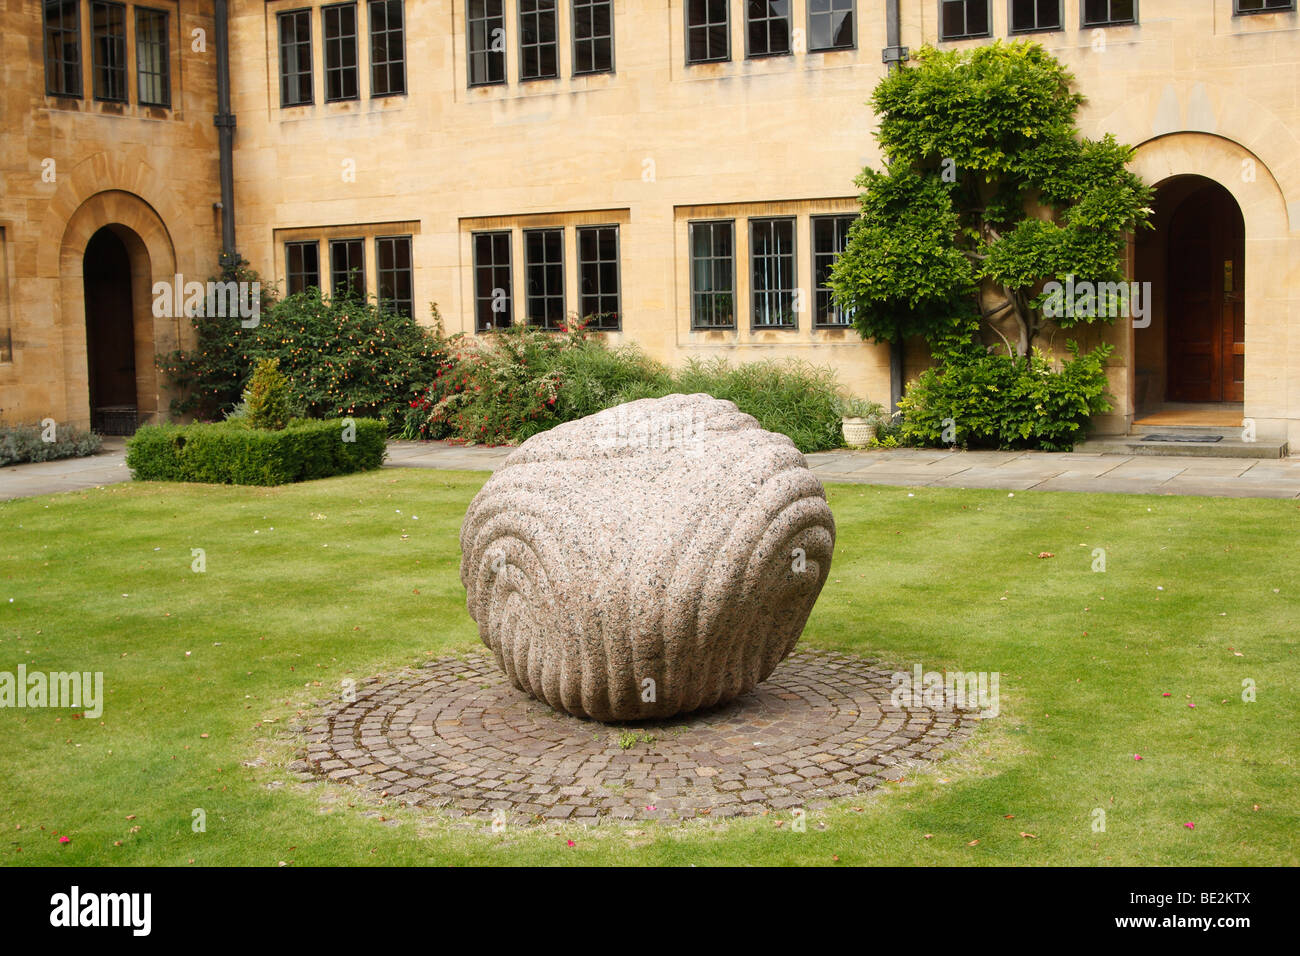 [Modern art] sculpture in university quad, Nuffield College, Oxford, England, UK Stock Photo